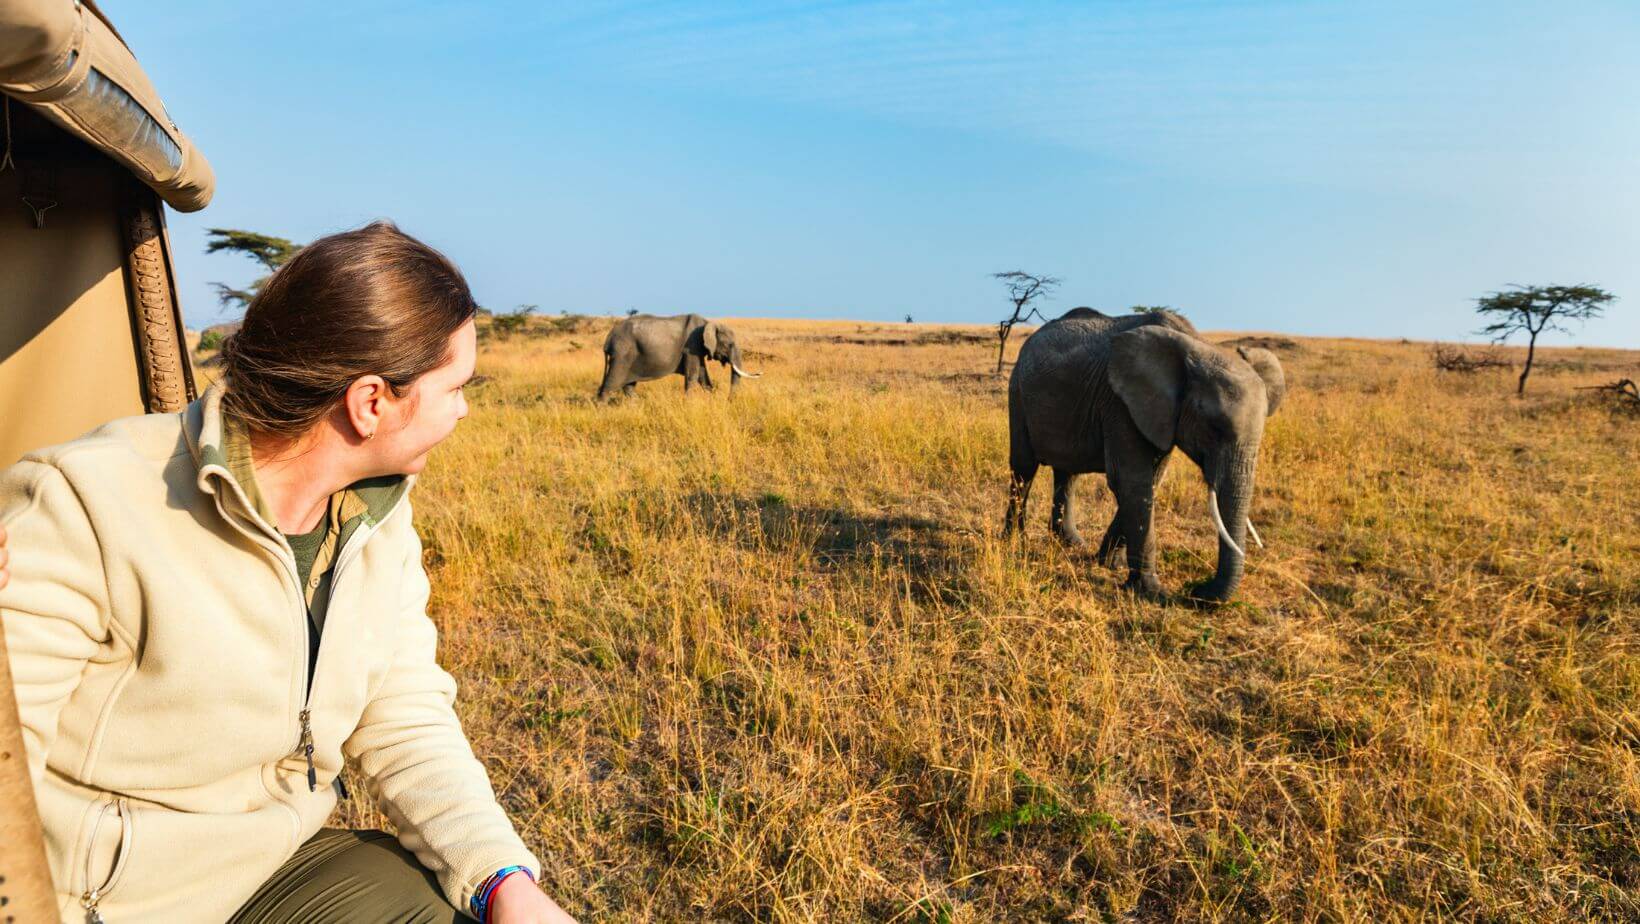 Is Tanzania safe for solo female travellers?